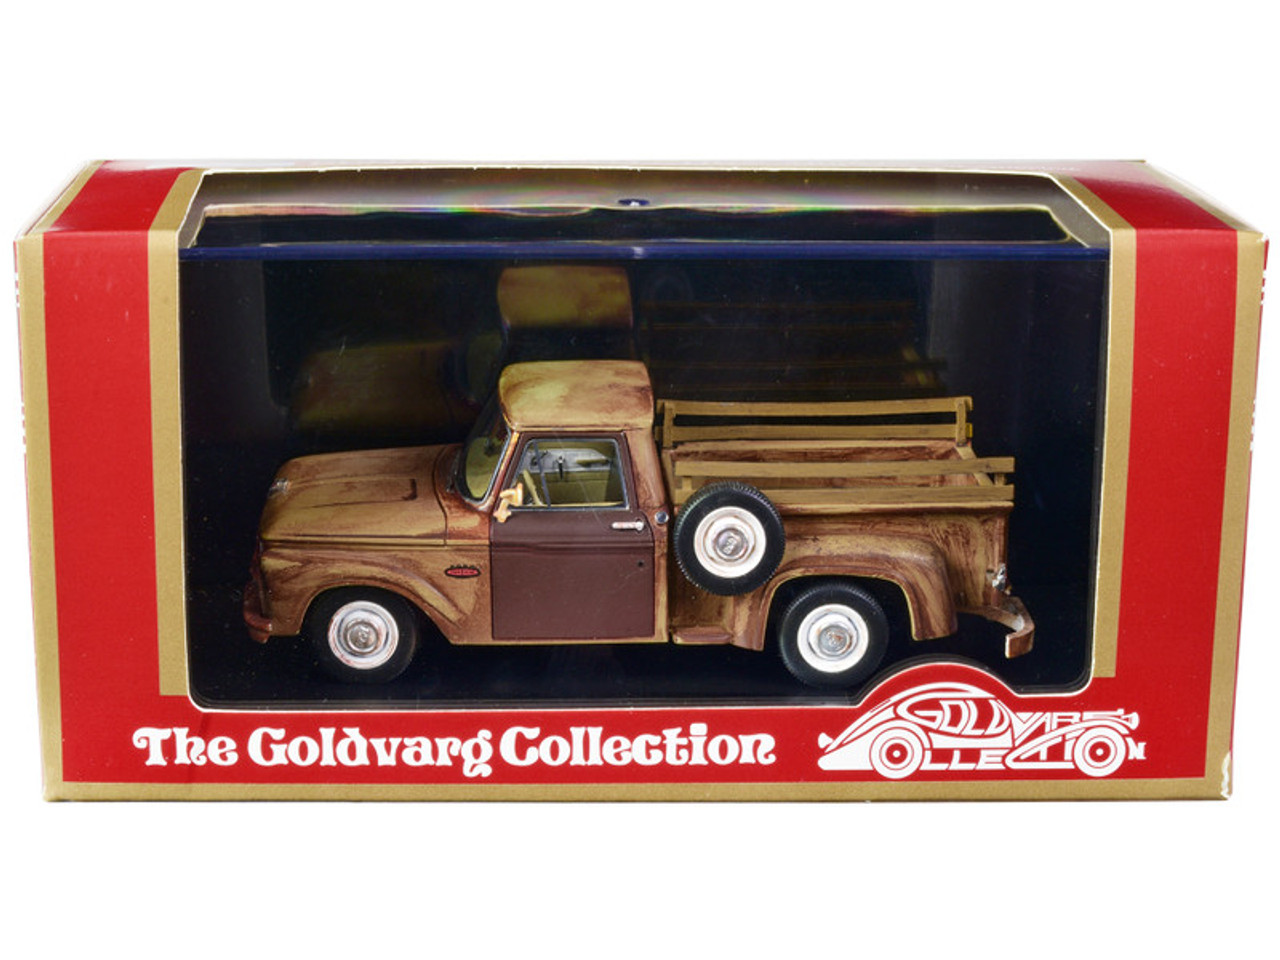 1965 Ford F-100 Stepside Pickup Truck Rusted "For Sale" Limited Edition to 220 pieces Worldwide 1/43 Model Car by Goldvarg Collection